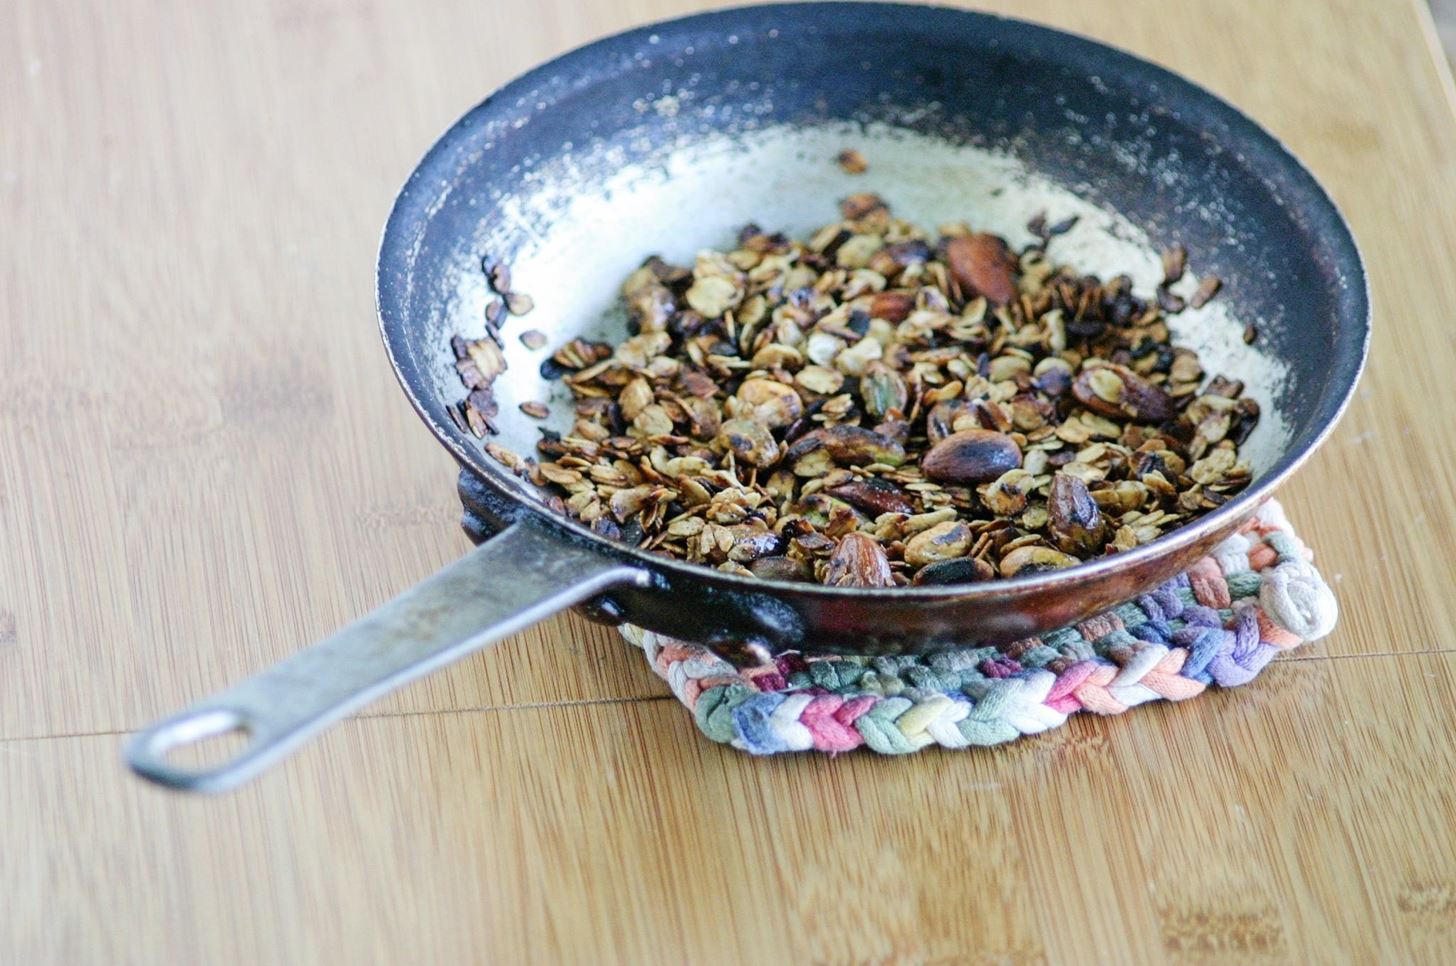 Ditch the Oven & Make Crunchy Stovetop Granola in Just 5 Minutes